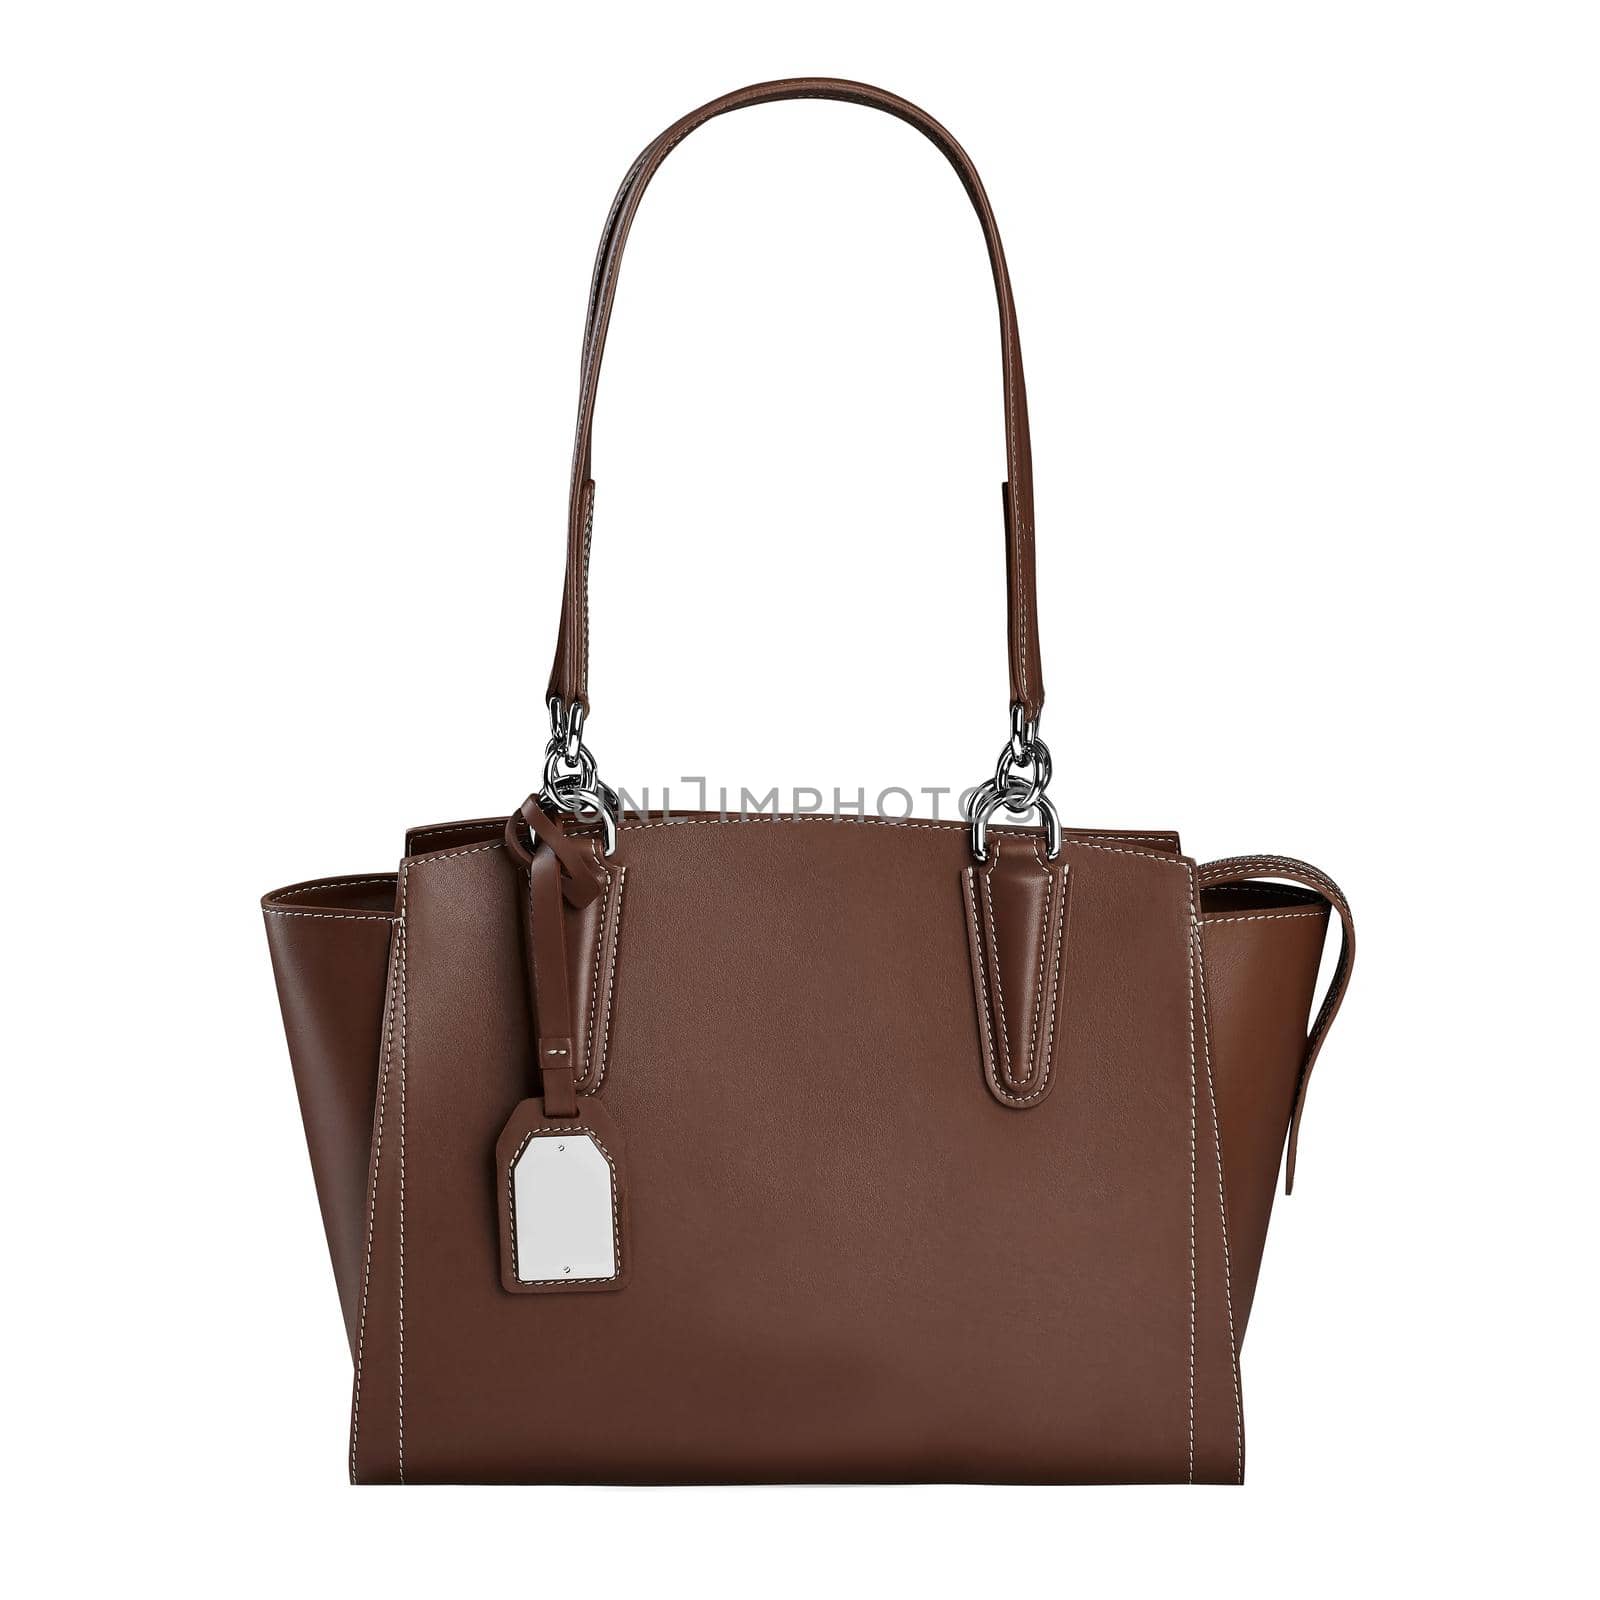 Closeup of trendy brown leather handbag with two handles, chrome fittings and blank labels isolated on white background. Exclusive accessories for women